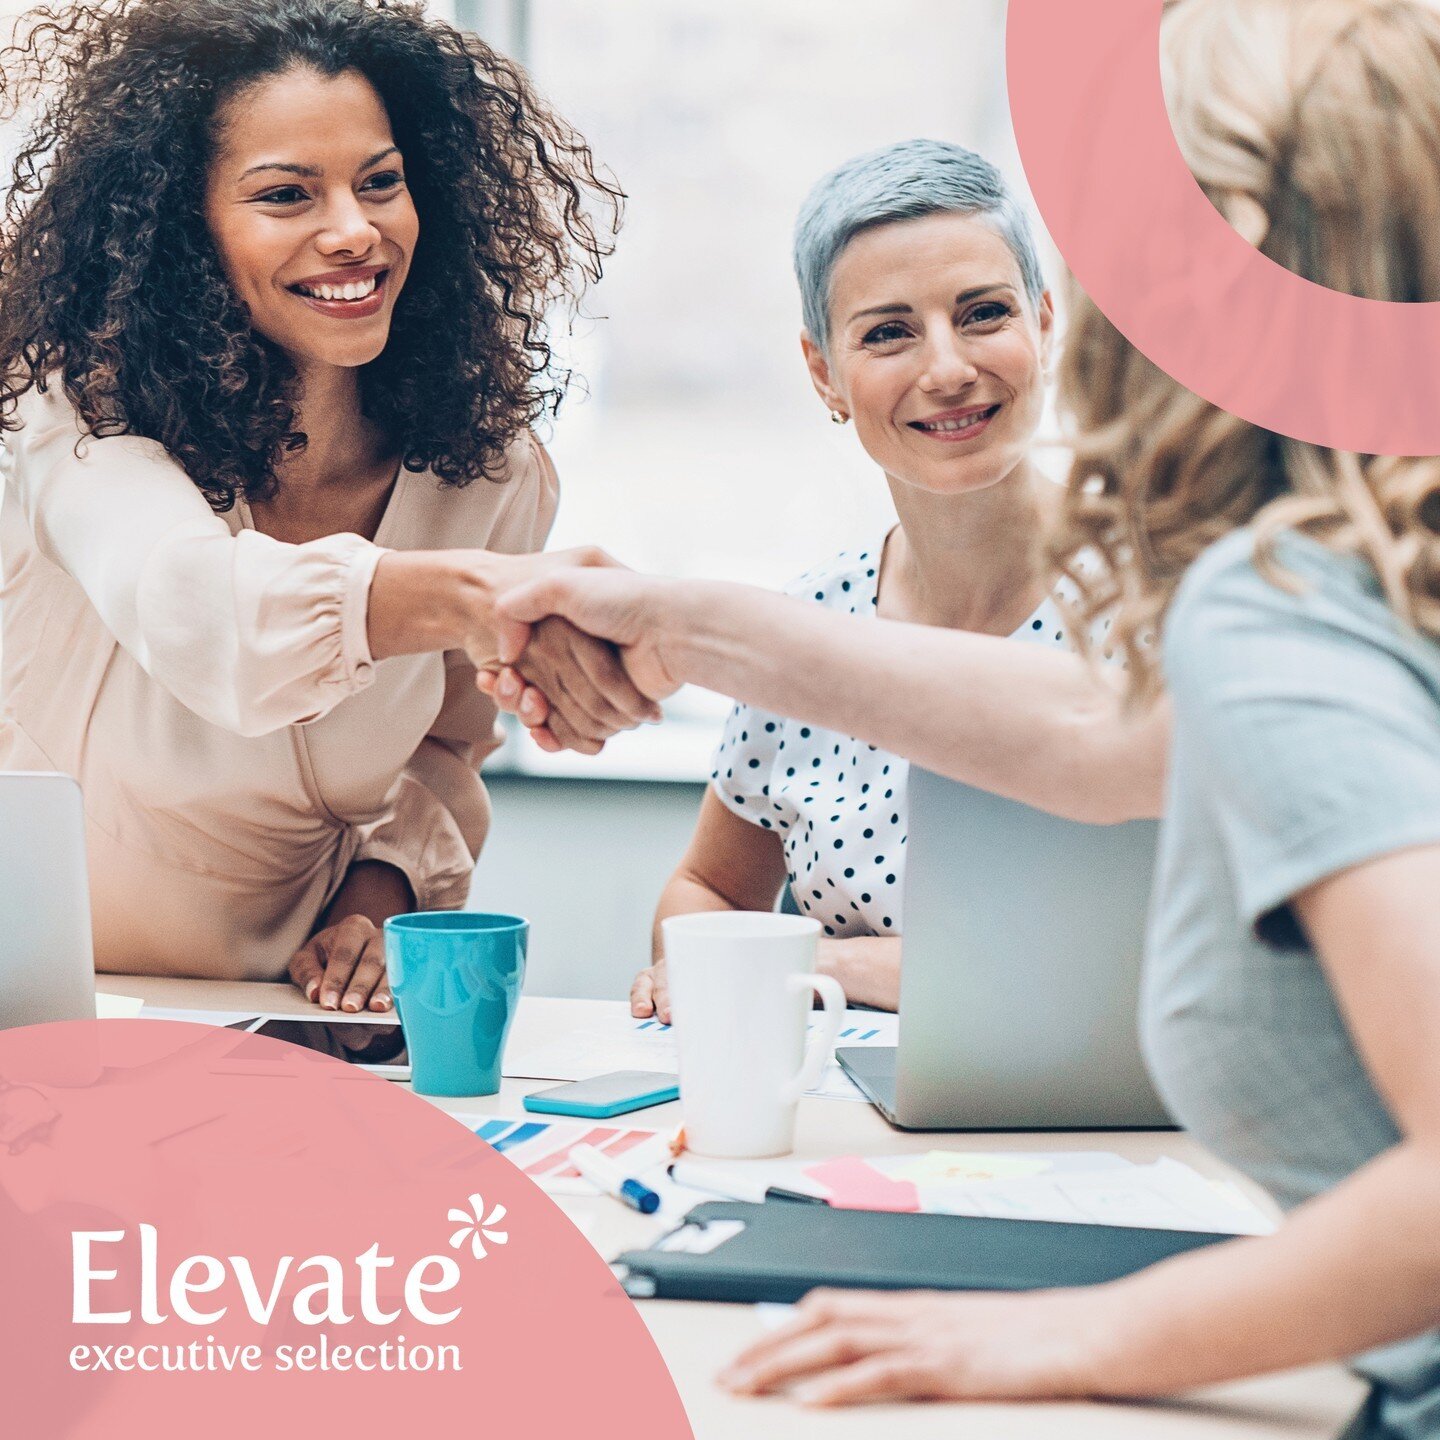 Are you looking for a change, career-wise? Elevate Executive Selection, our sister company, provides top-level recruitment support in the re/insurance industry. Their clients include both start-ups and enterprises looking to expand their presence. To